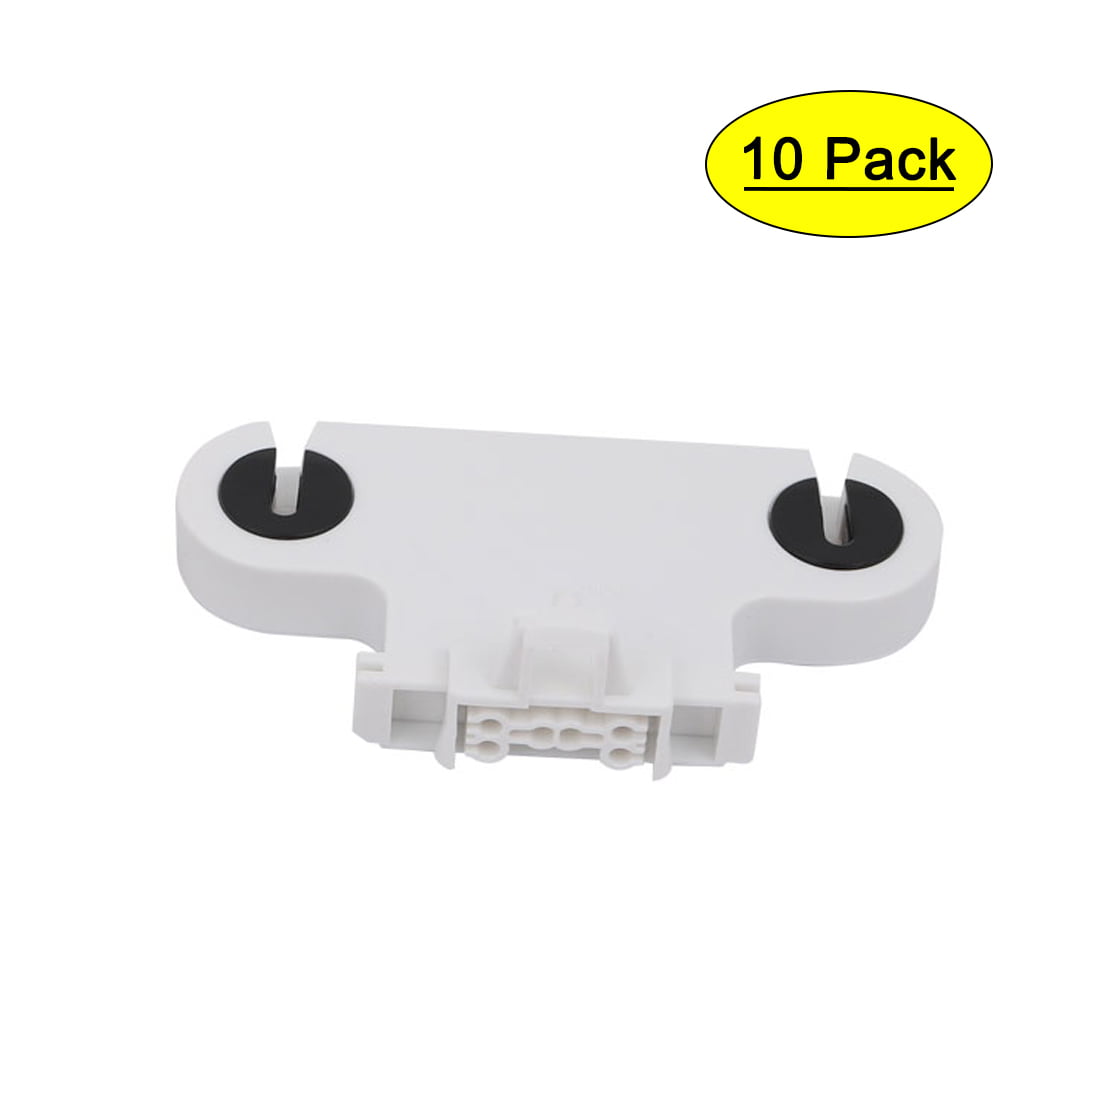 10 x Replacement lamp holders sockets for T5 Landscape Light Bulbs 